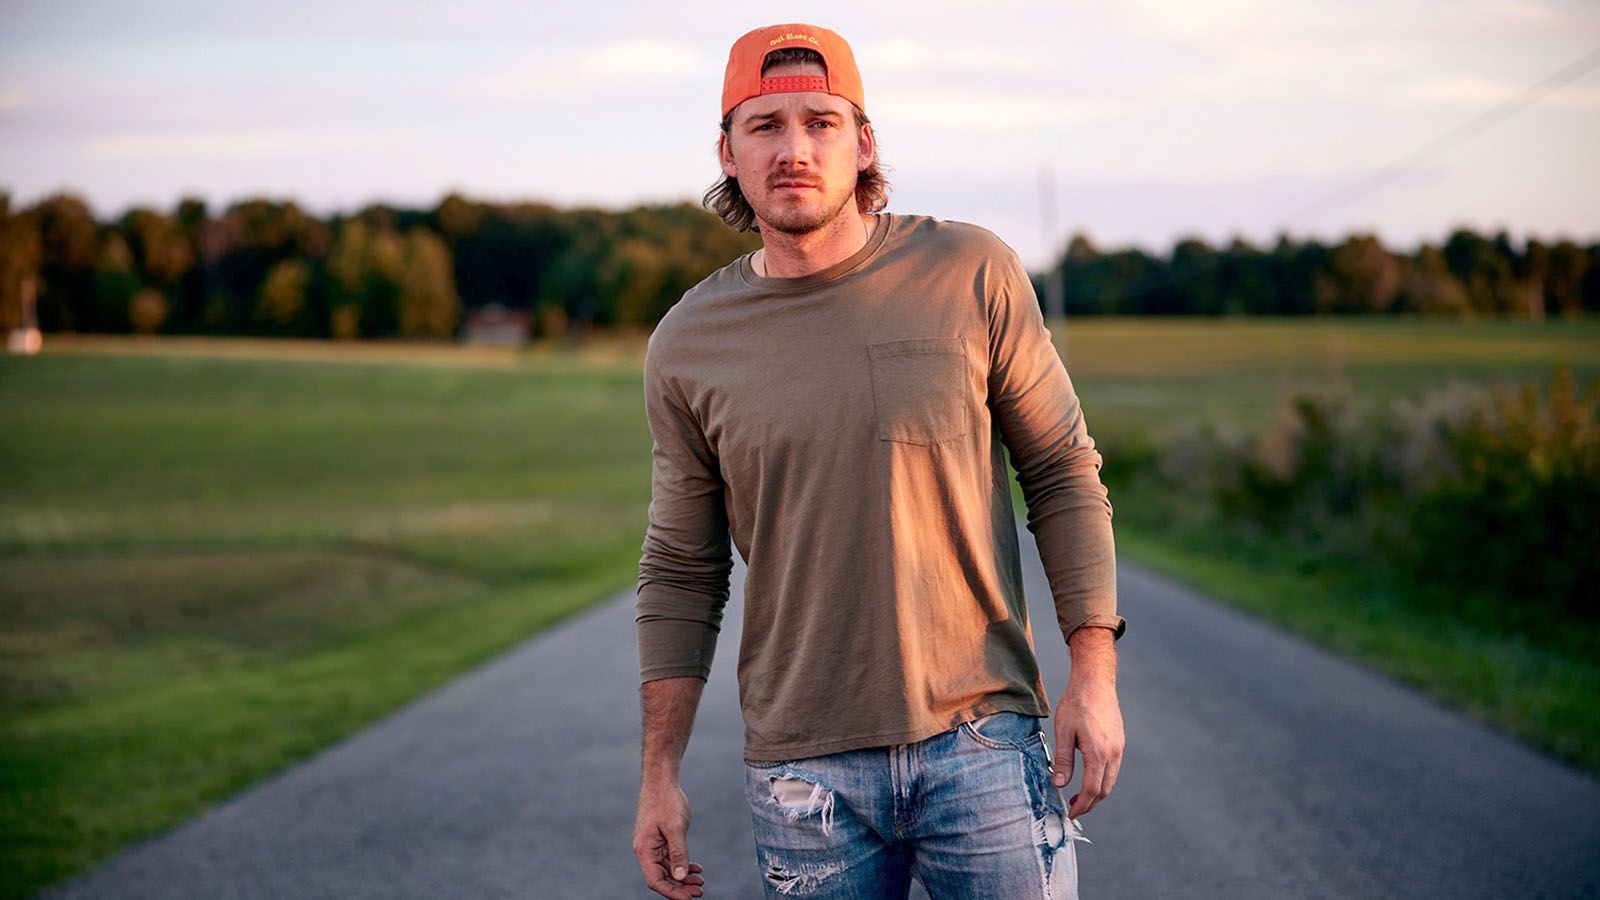 Morgan Wallen will be at Lucas Oil Stadium in Indianapolis in April.